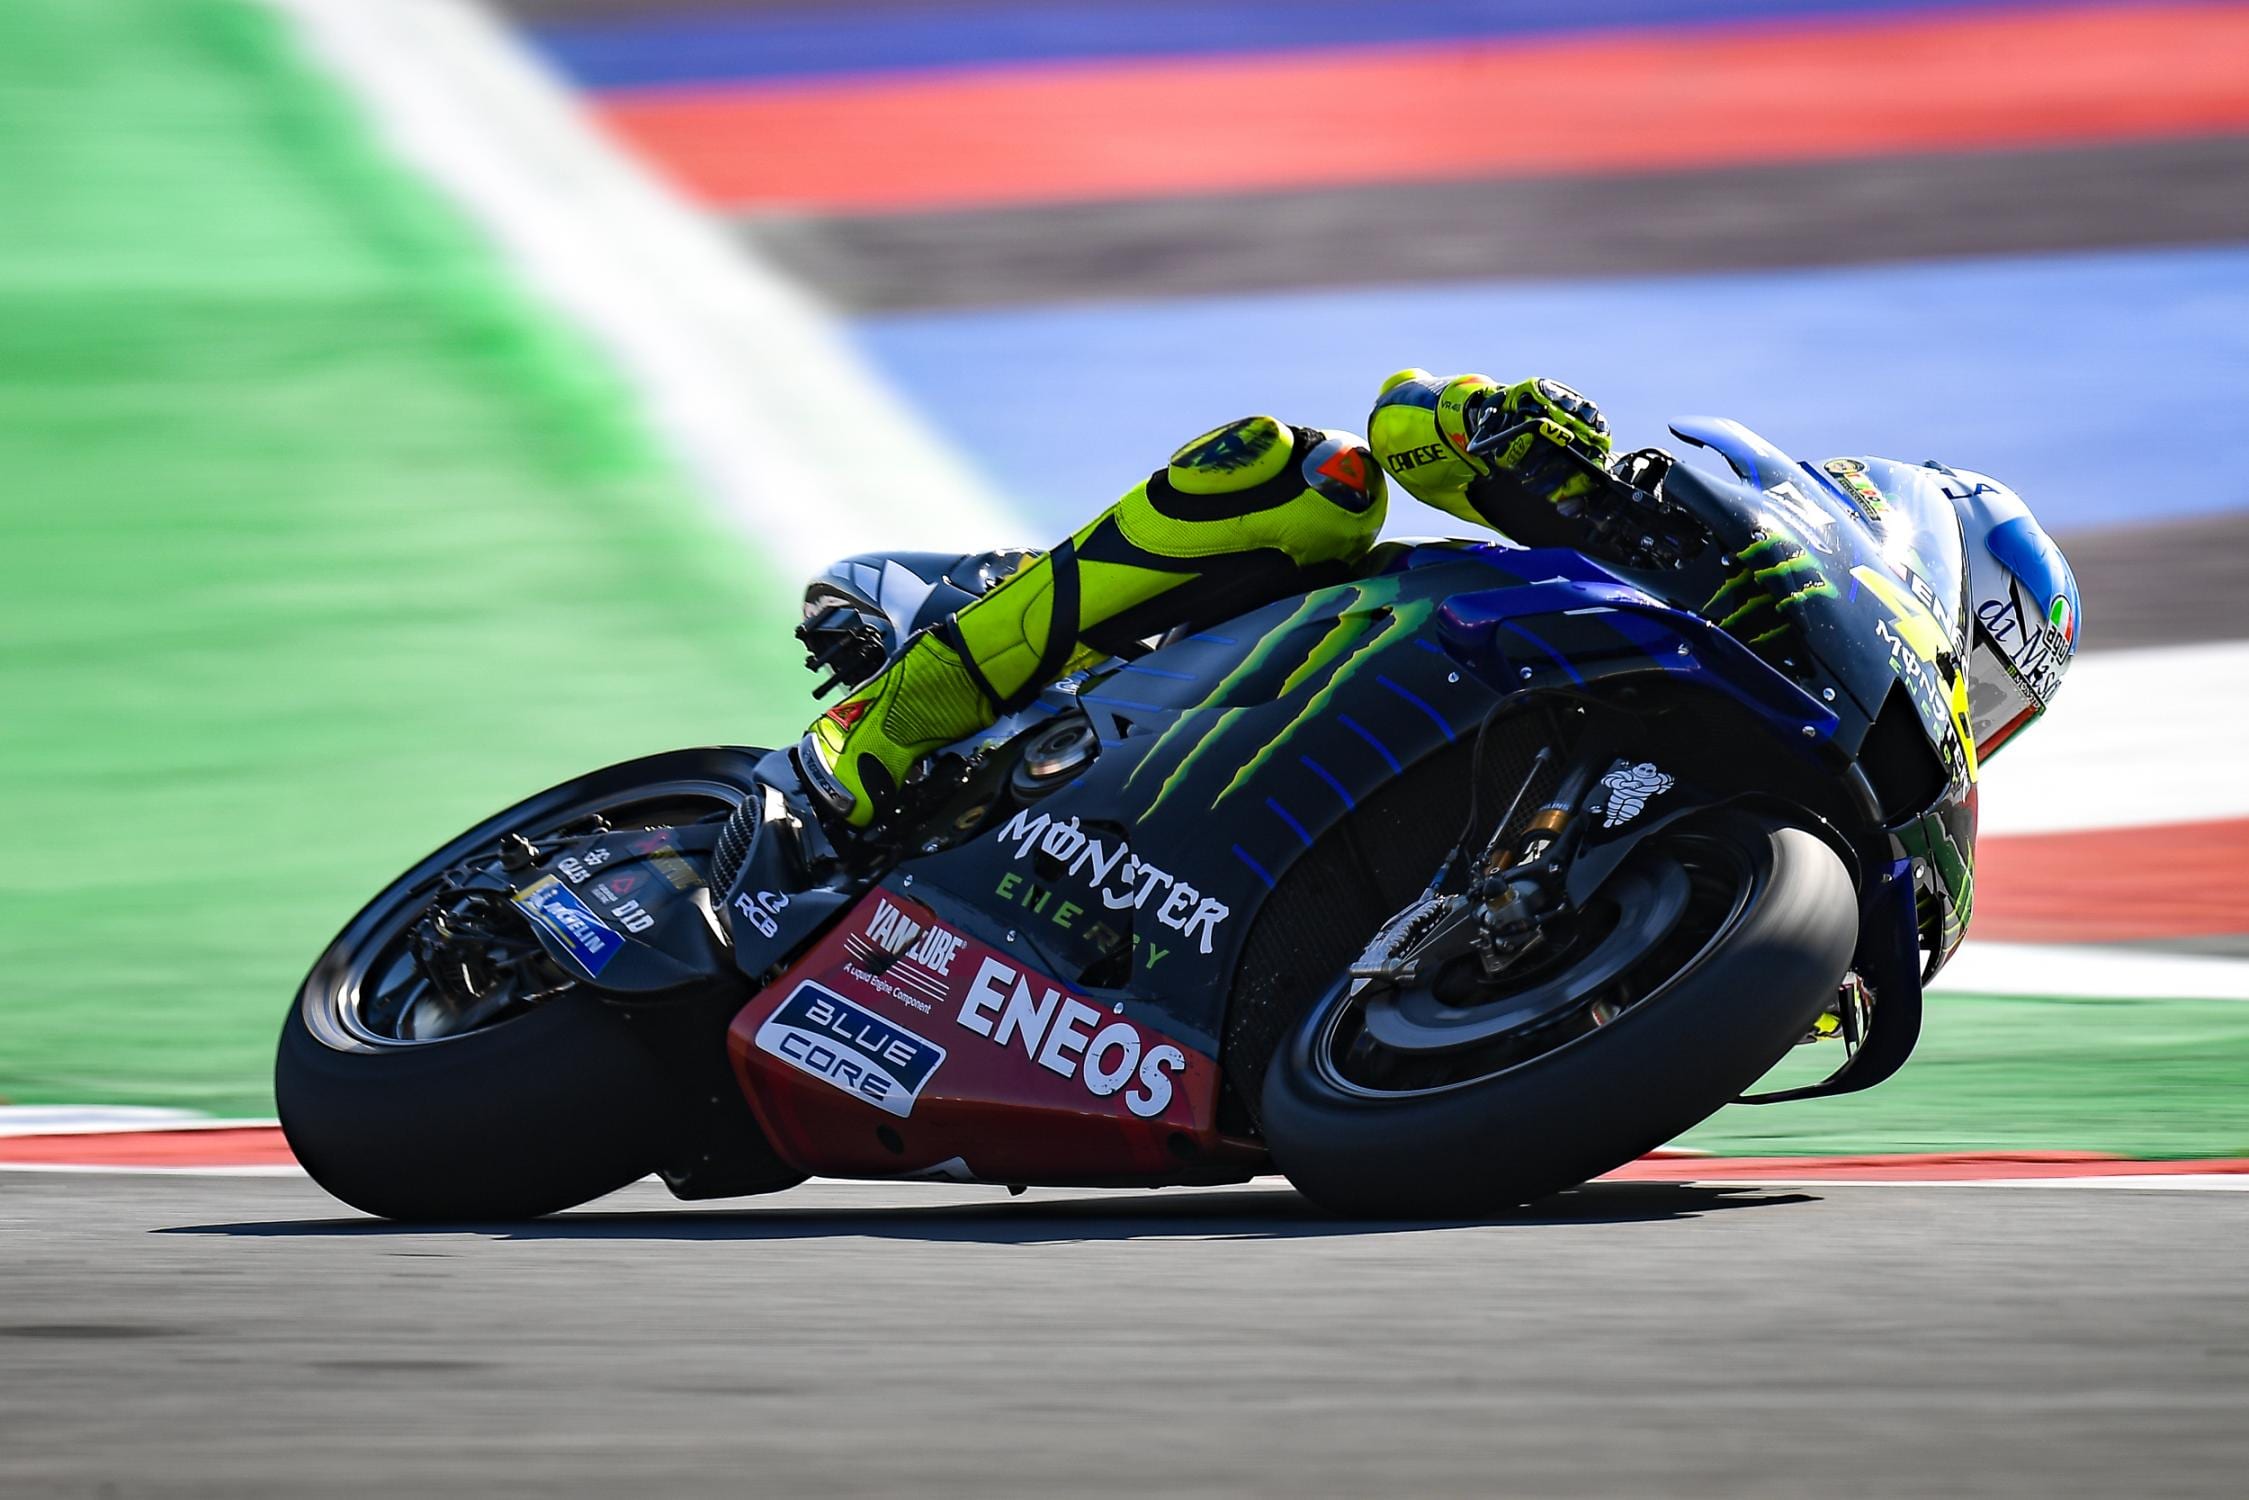 MotoGP: Valentino Rossi leads the way in FP3 - Everything Moto Racing